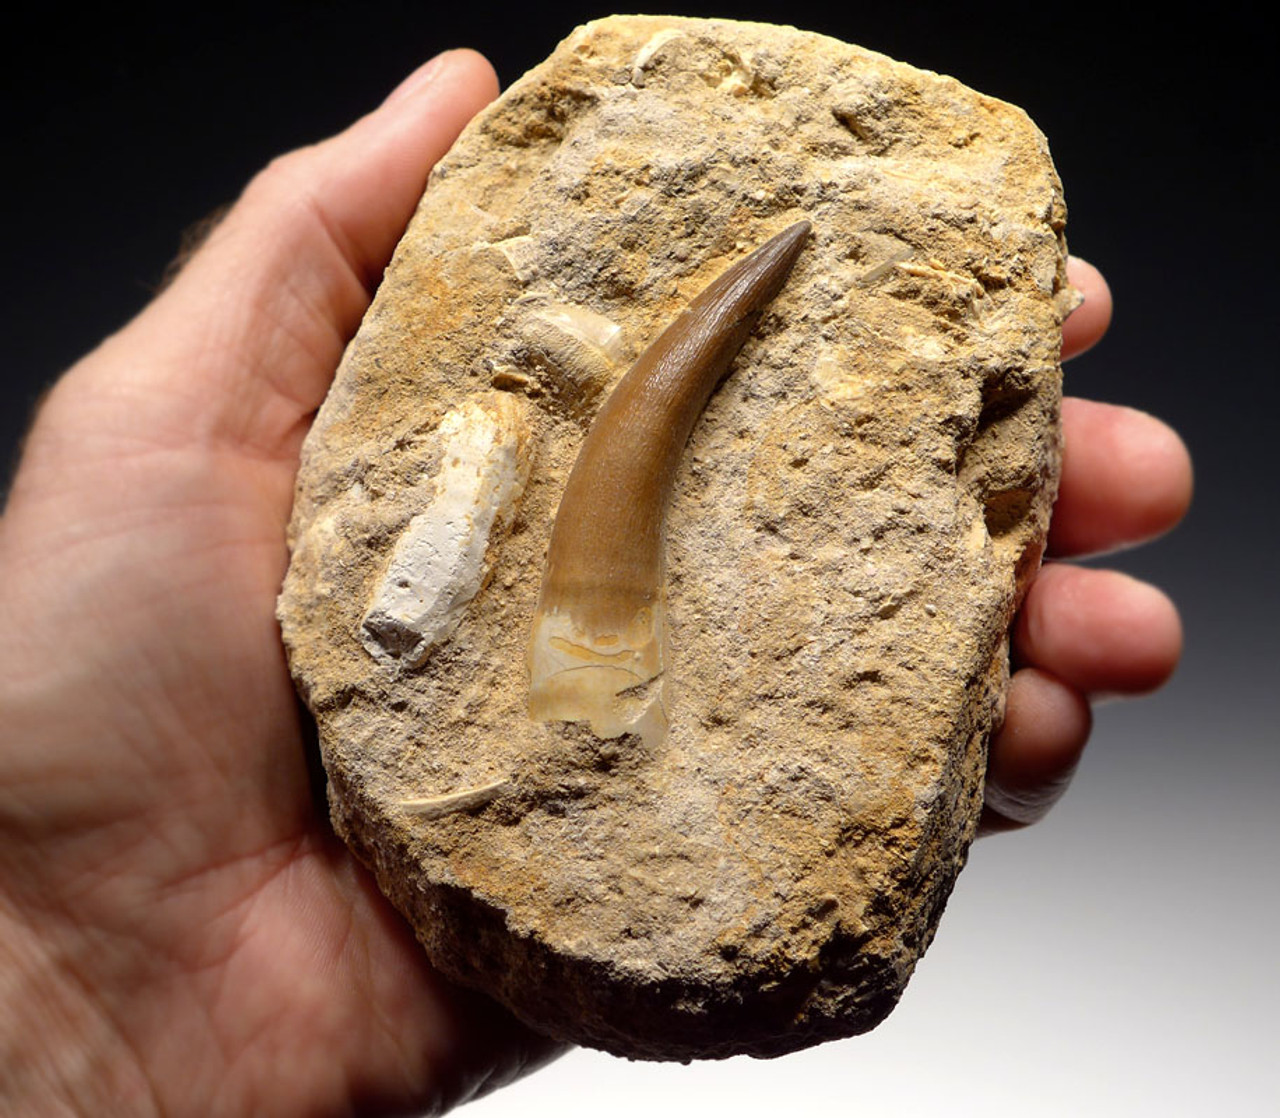 PLEX001 - NEARLY 3 INCH HUGE ELASMOSAUR MARINE REPTILE TOOTH IN MATRIX WITH SQUALICORAX SHARK TOOTH